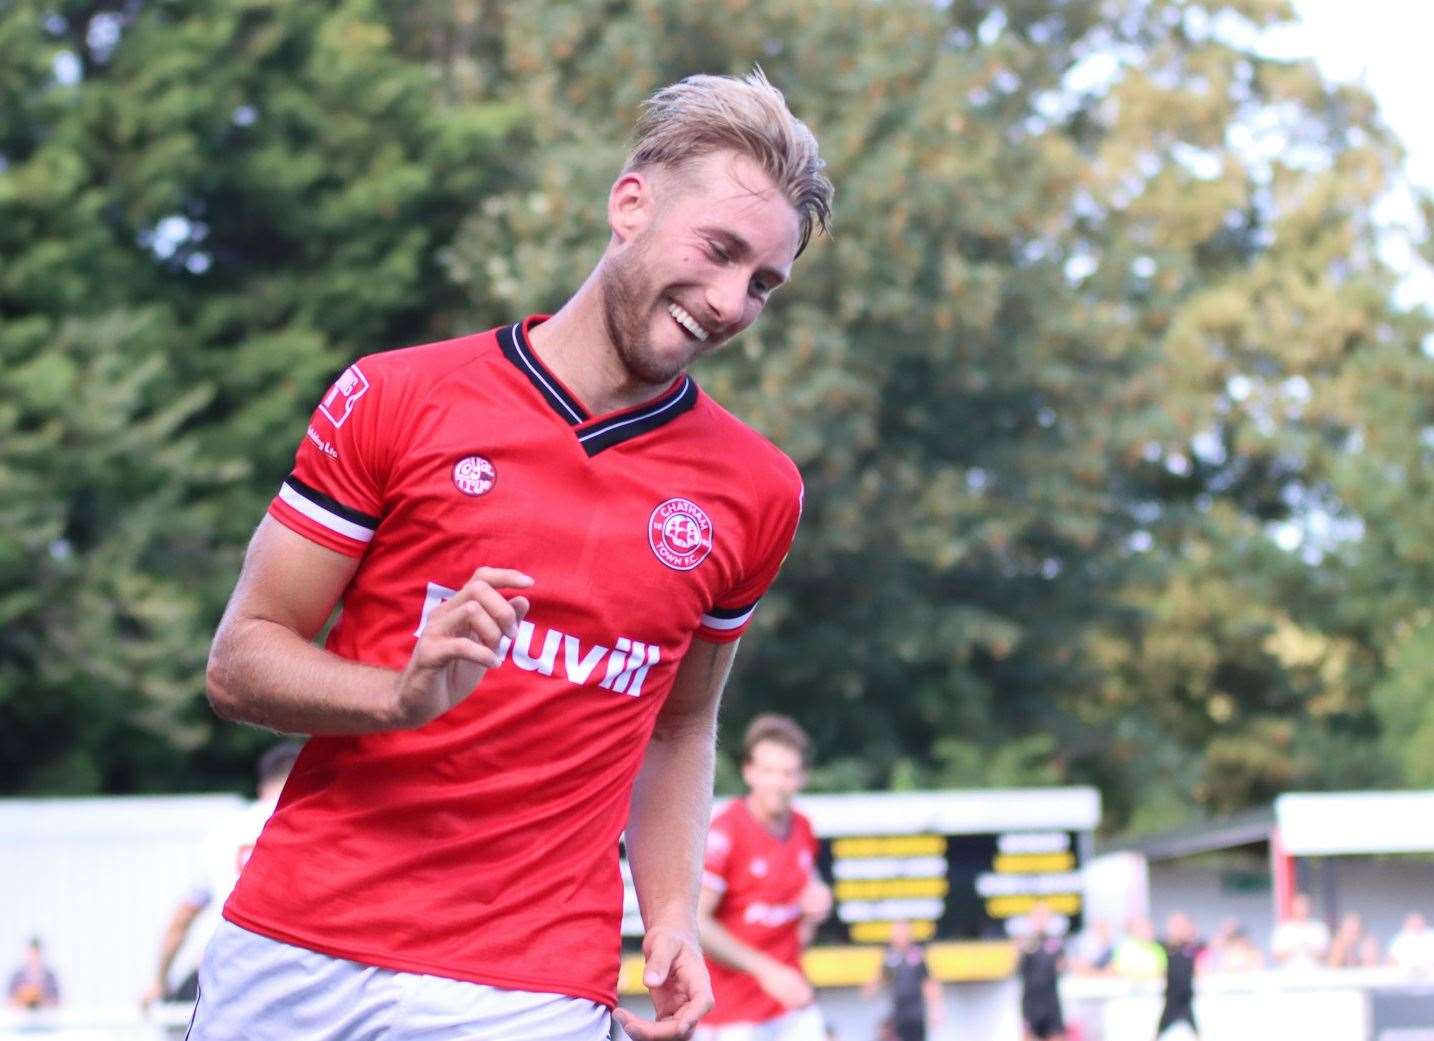 New signing Tommie Fagg scored for Chatham Town in the FA Cup and is set to make his league debut this Saturday Picture: Max English @max_ePhotos